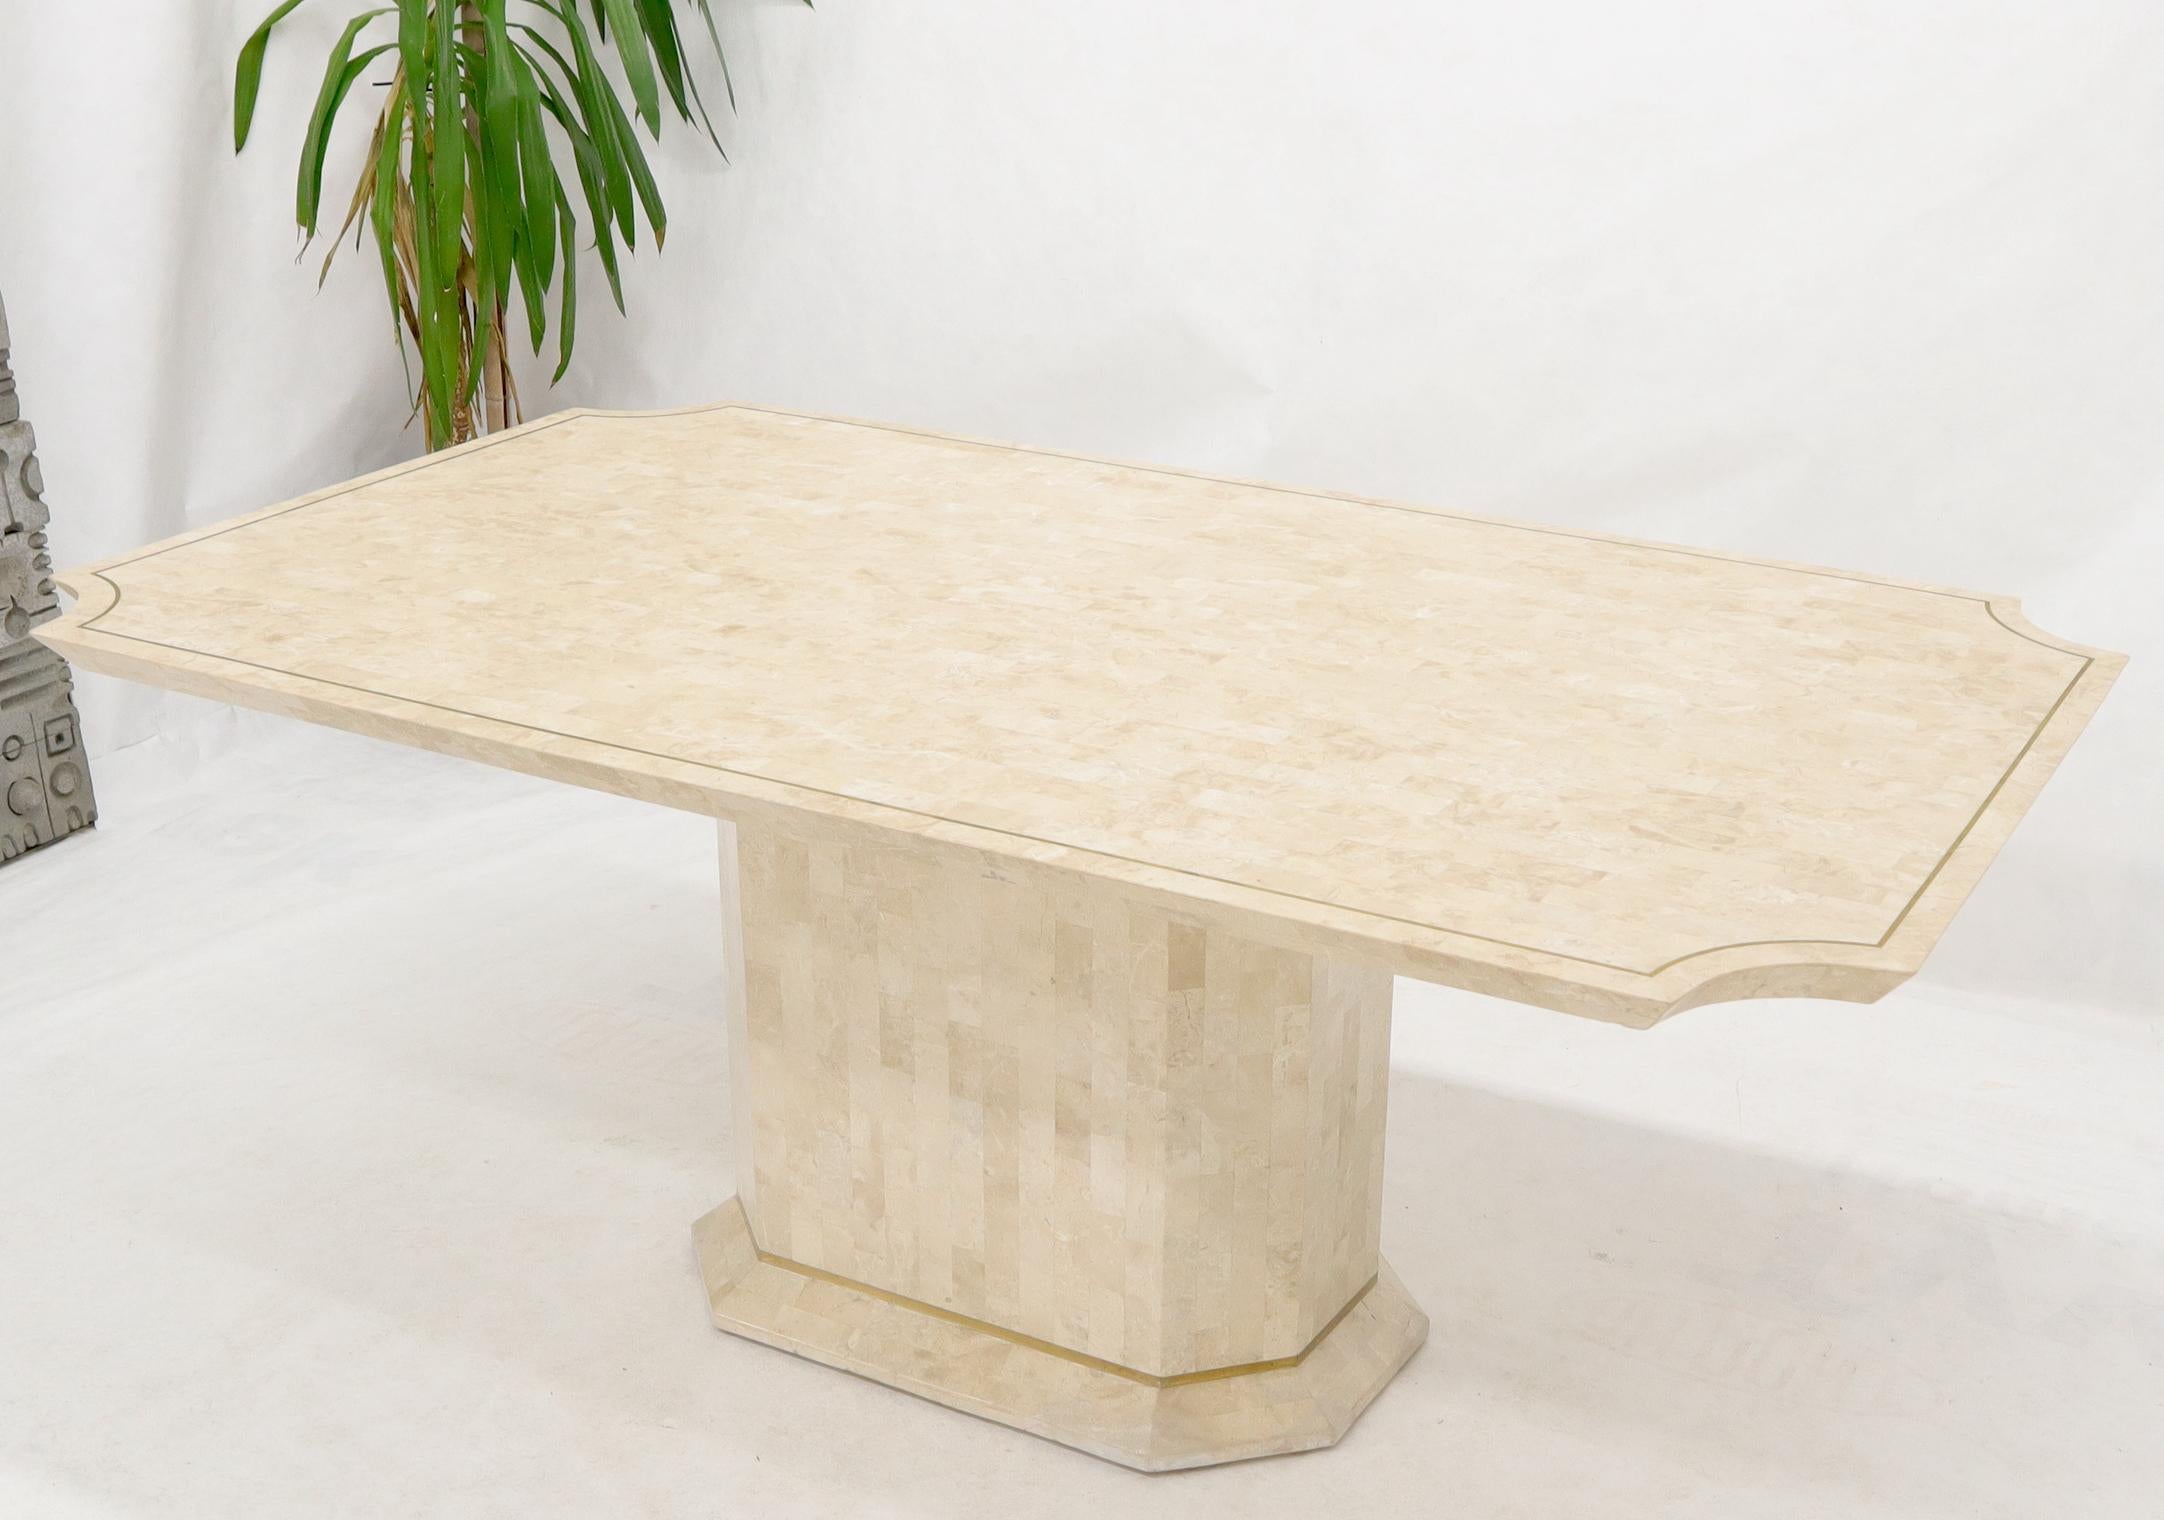 Mid-Century Modern tessellated stone tile brass inlay rectangle dining room table.